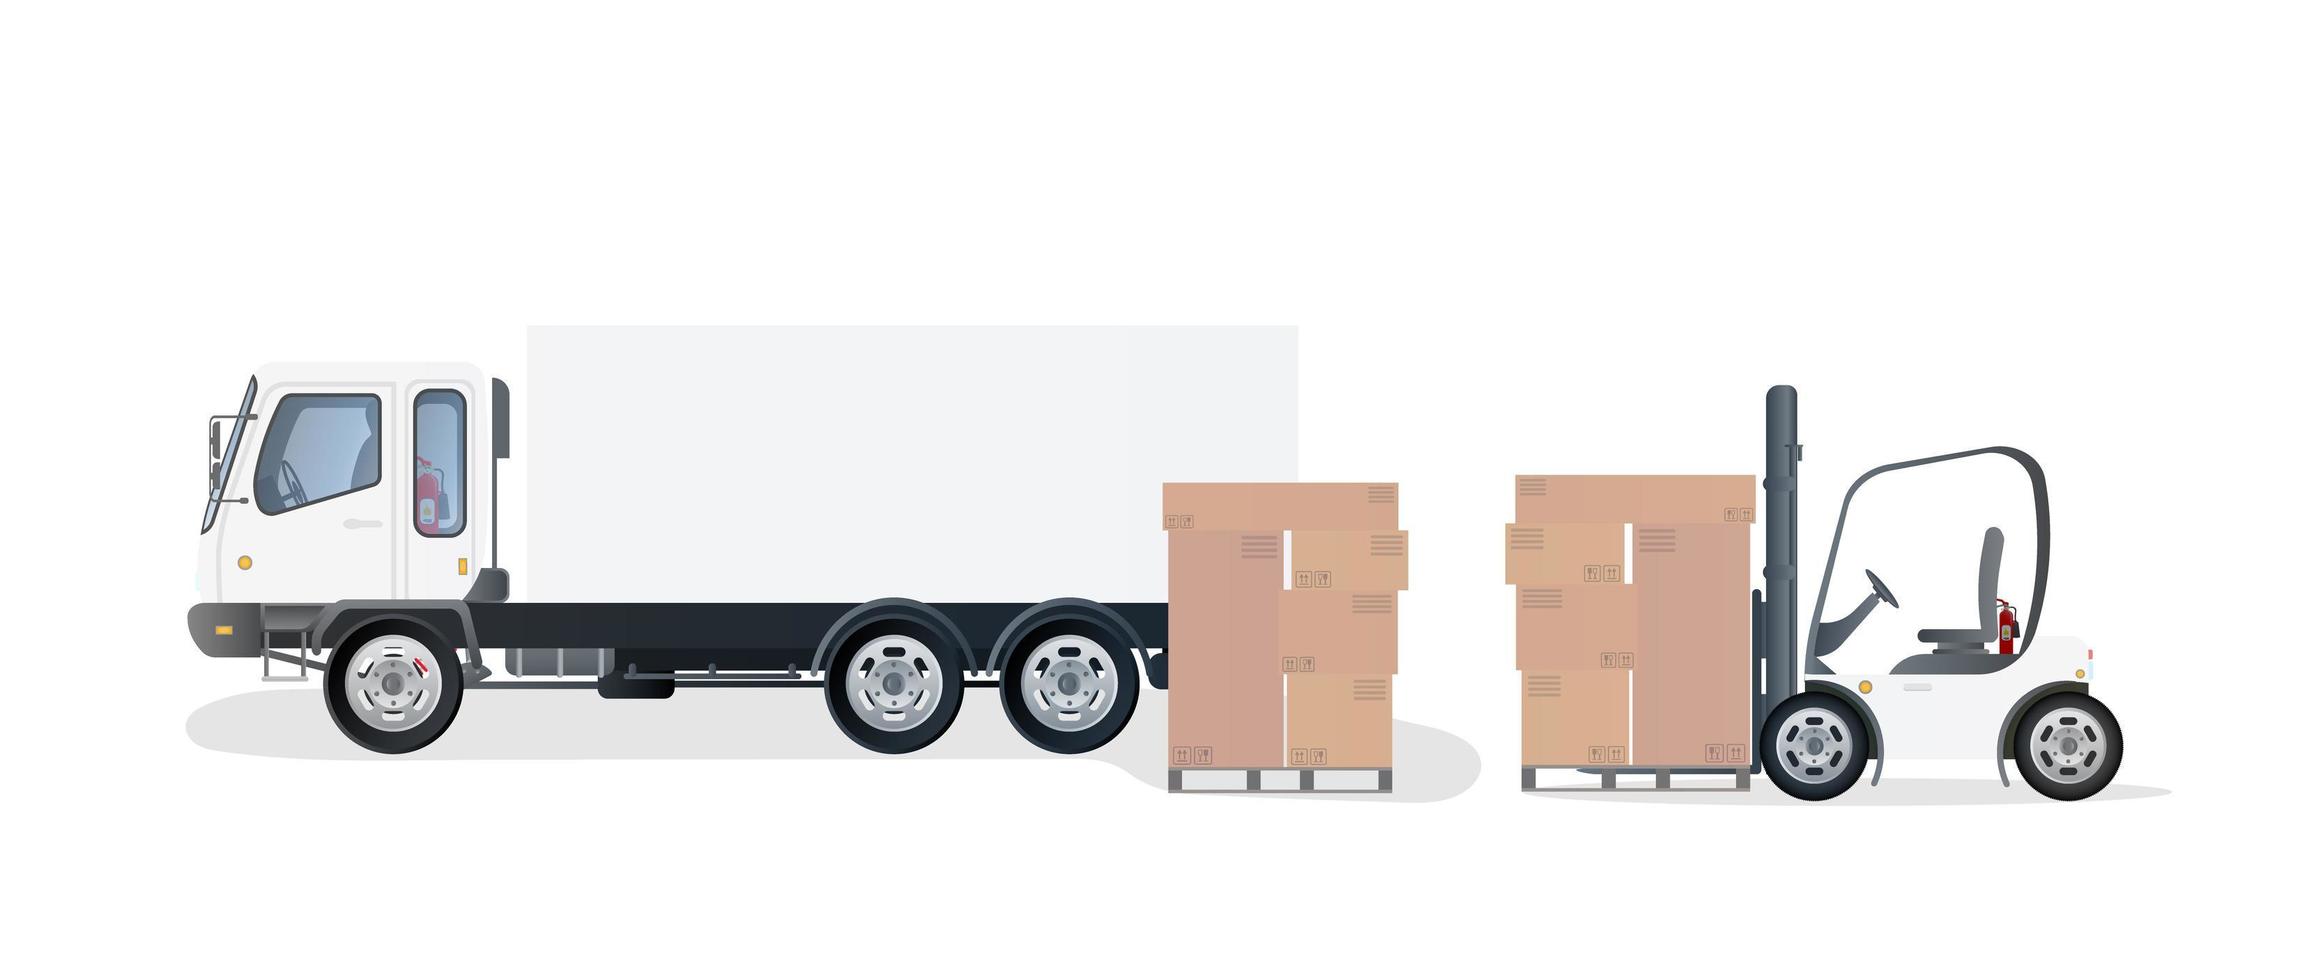 Lorry and pallet with cardboard boxes. Forklift raises the pallet. Industrial forklift. Carton boxes. The concept of delivery and loading of cargo. Isolated. Vector design